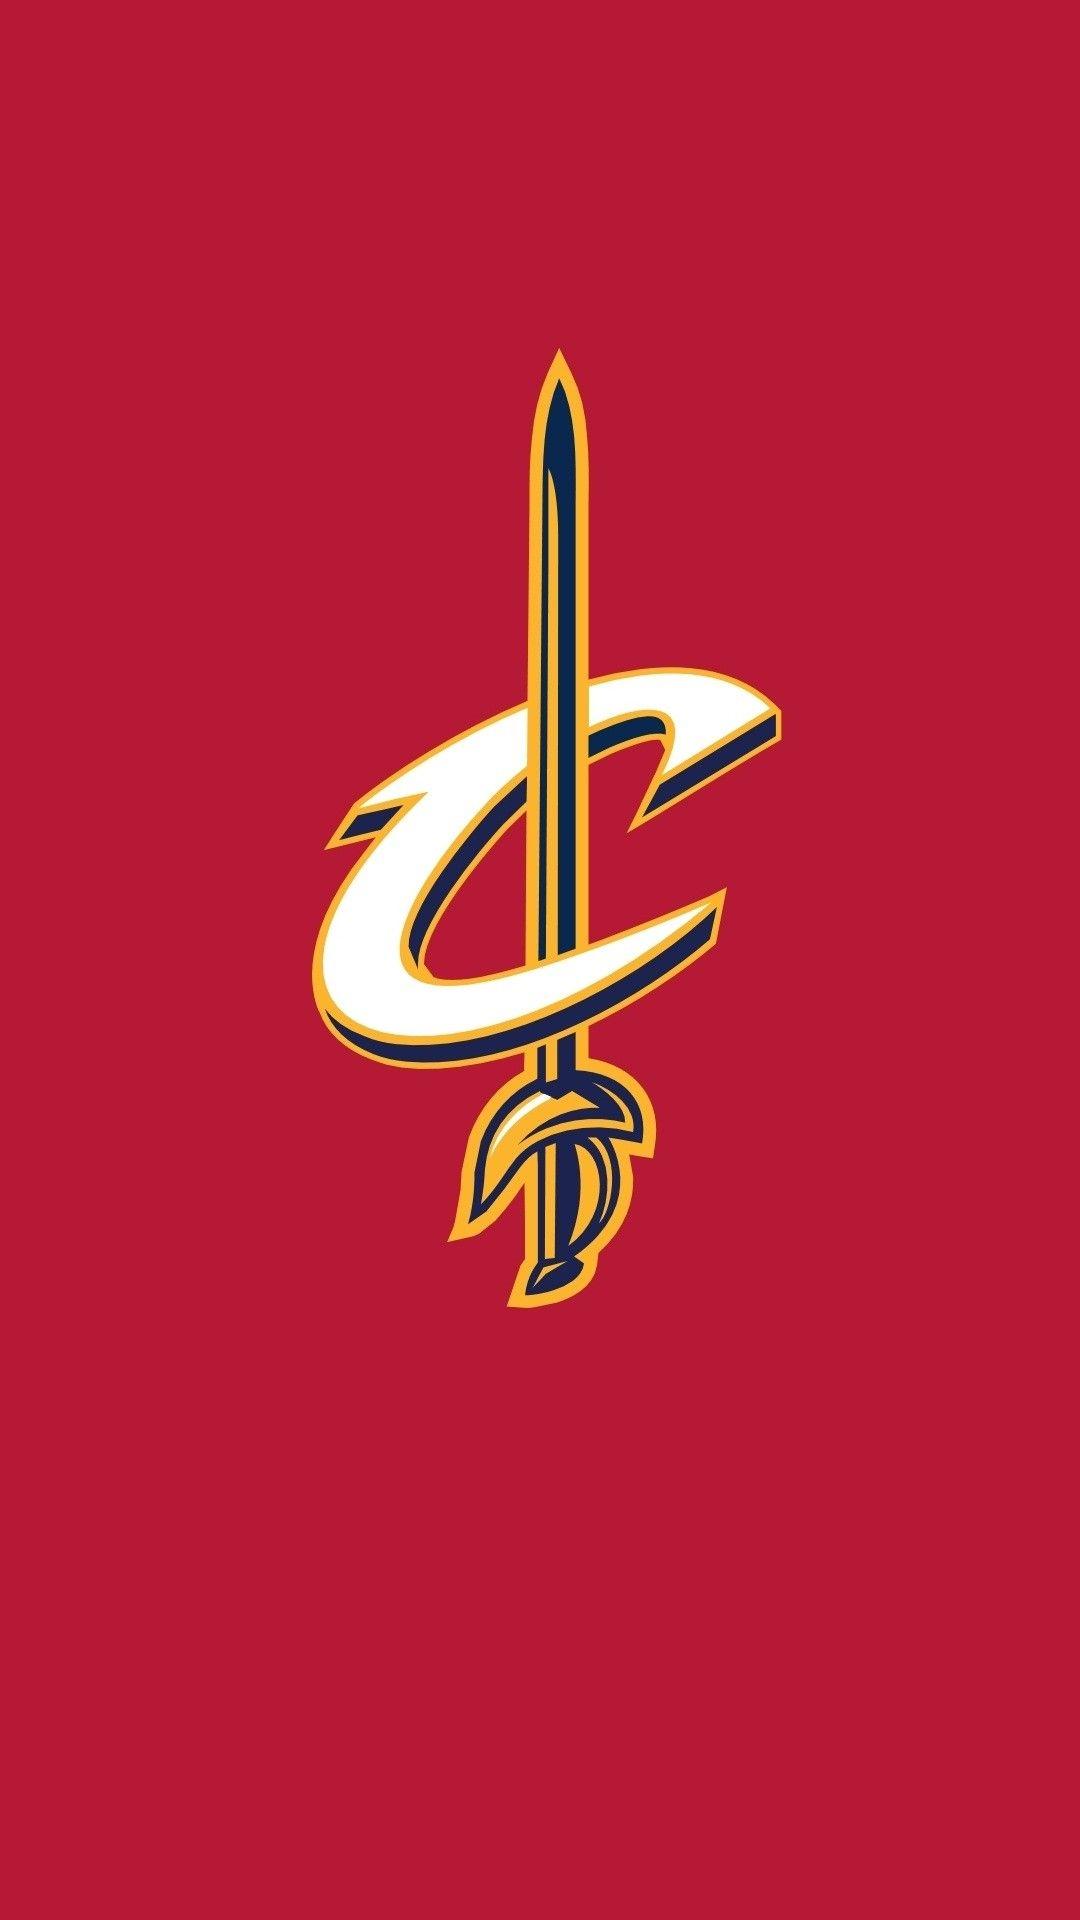 Cleveland Cavaliers Wallpaper For iPhone iPhone Wallpaper